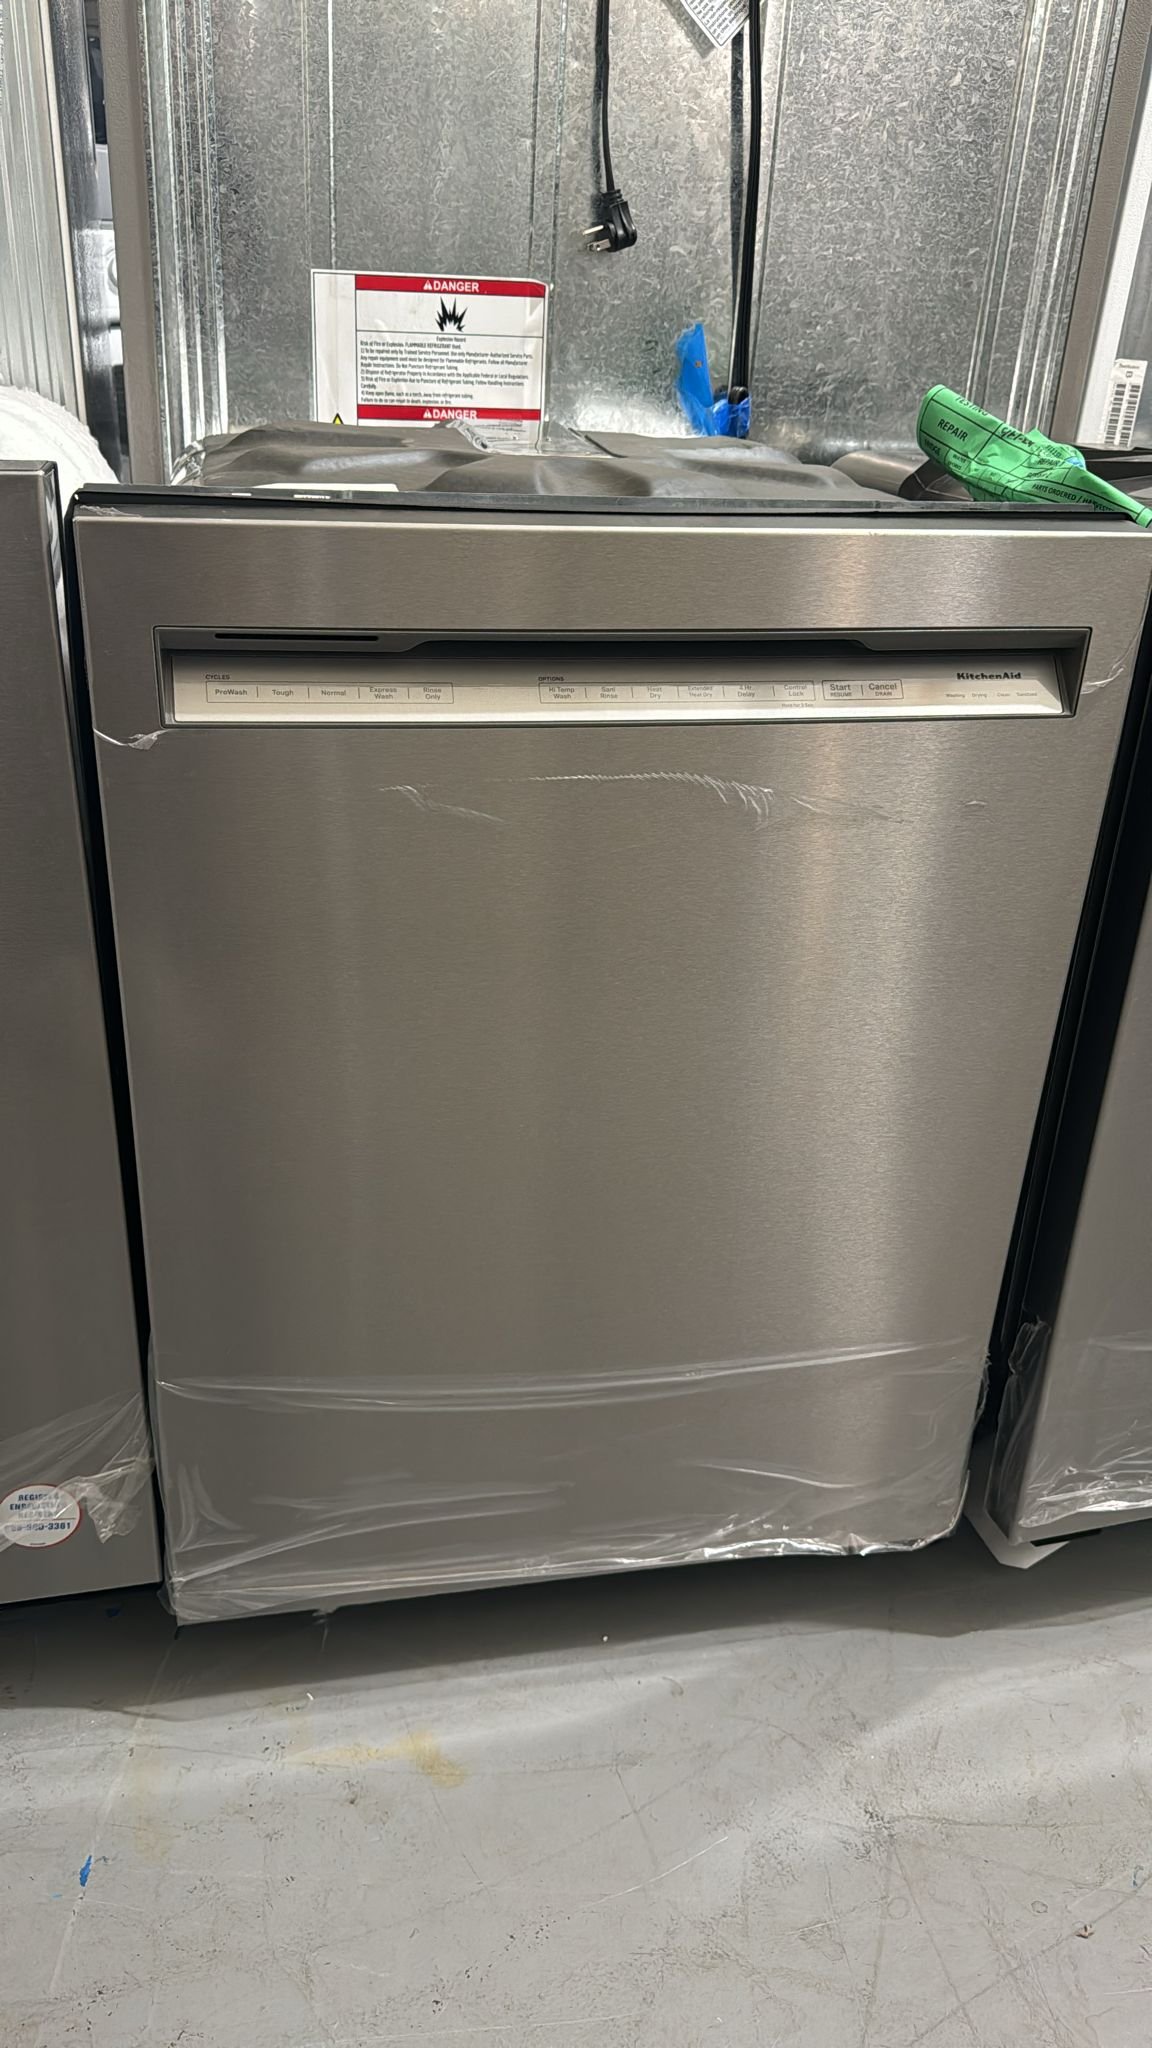 KitchenAid Scratch And Dent Dishwasher – Stainless